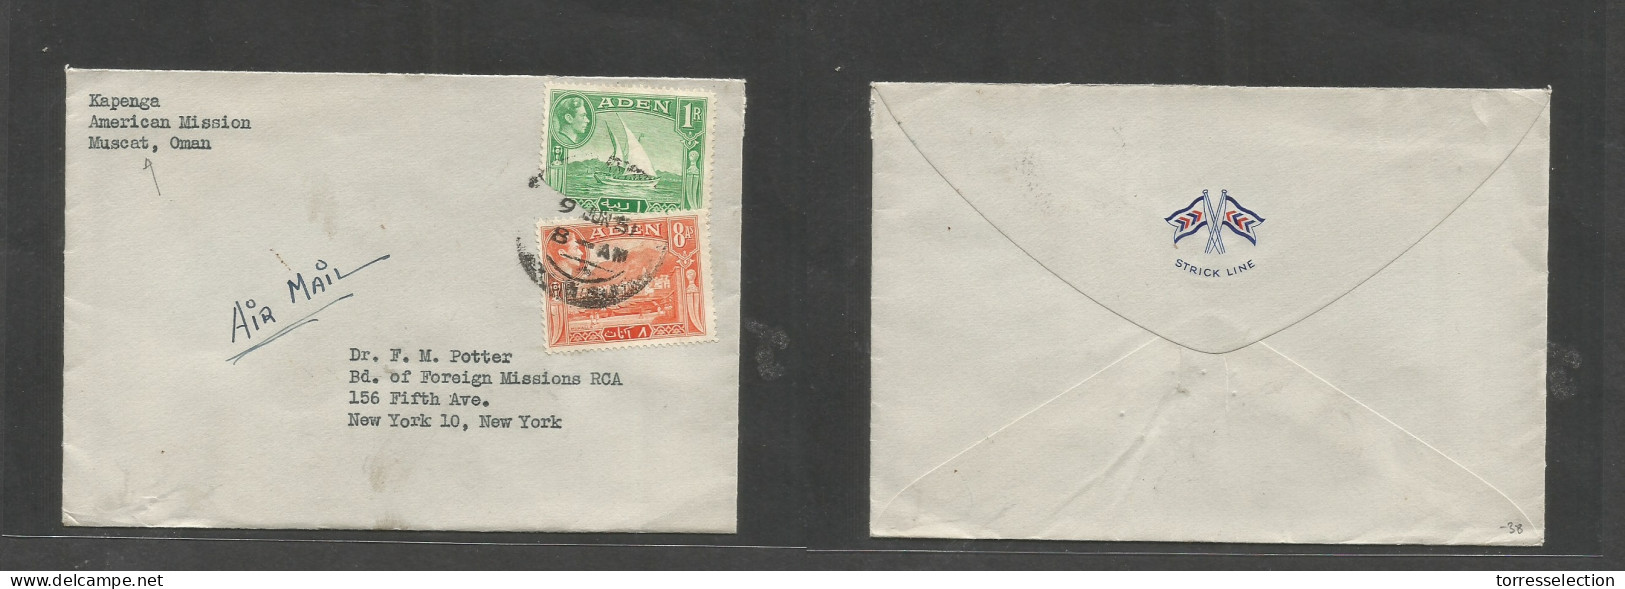 OMAN. 1951 (9 June) American Mission, Muscat - USA, NYC. Air Multifkd Envelope With Aden Stamps At 1rs 8a Rate, Cancelle - Oman